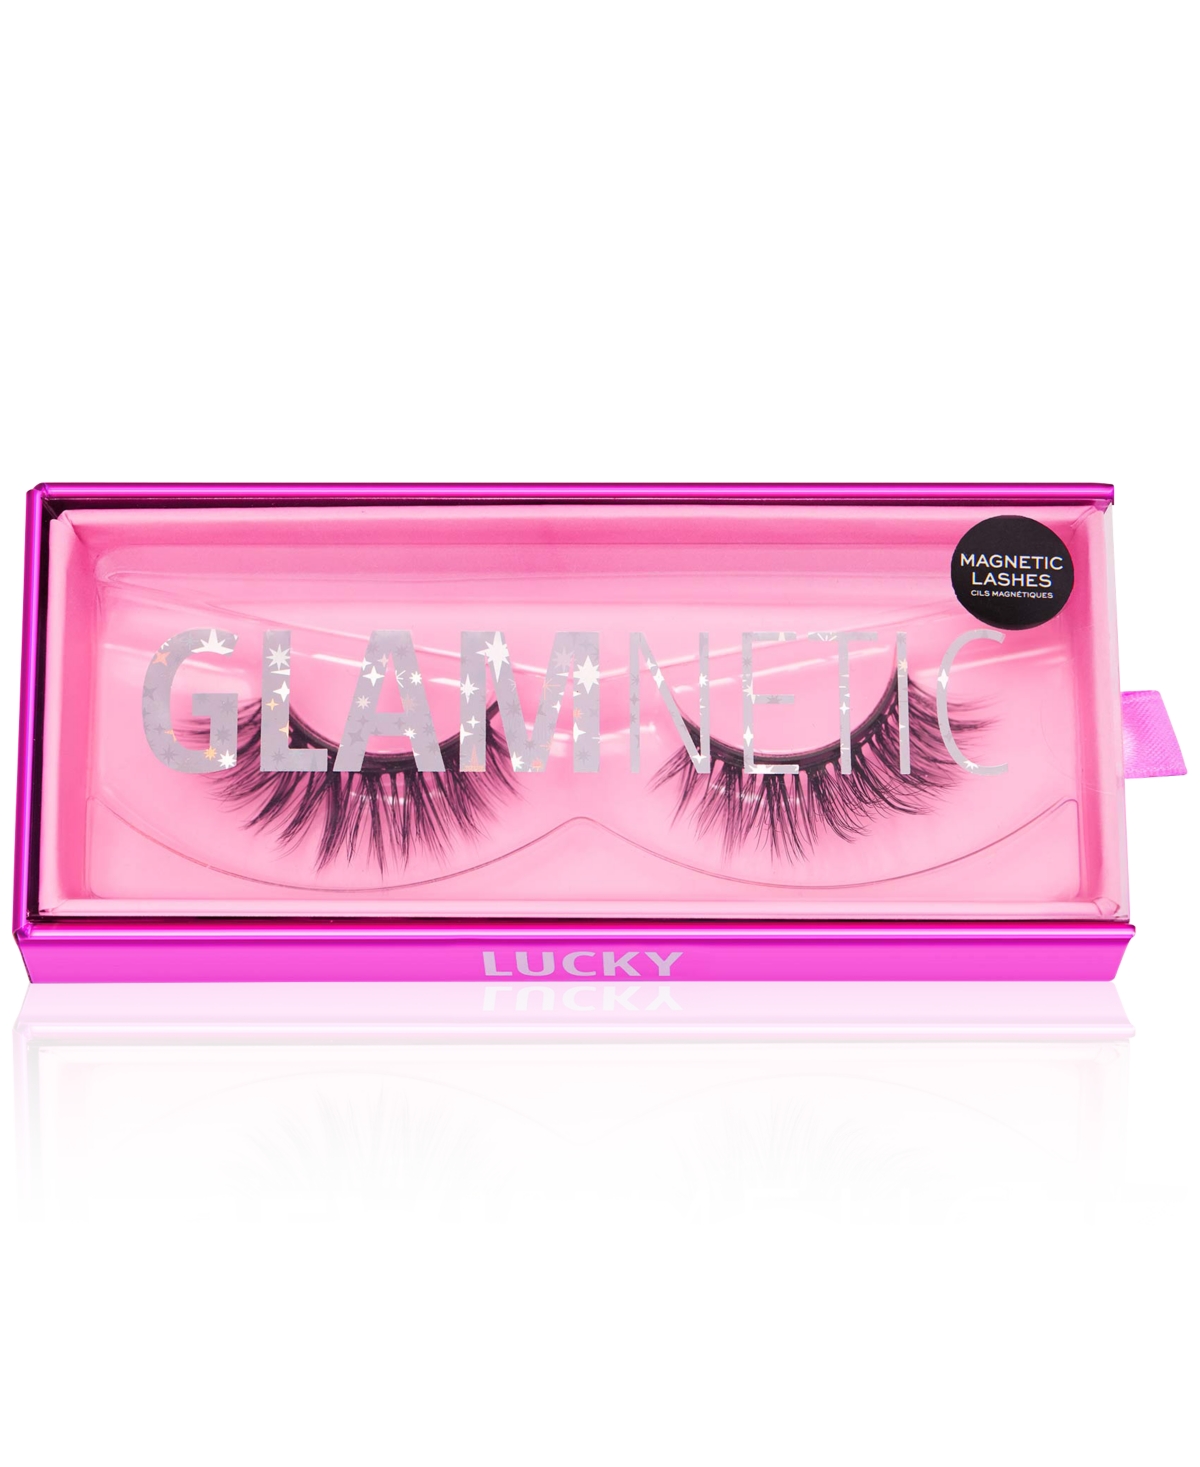 Glamnetic Magnetic Lashes - Lucky In Black